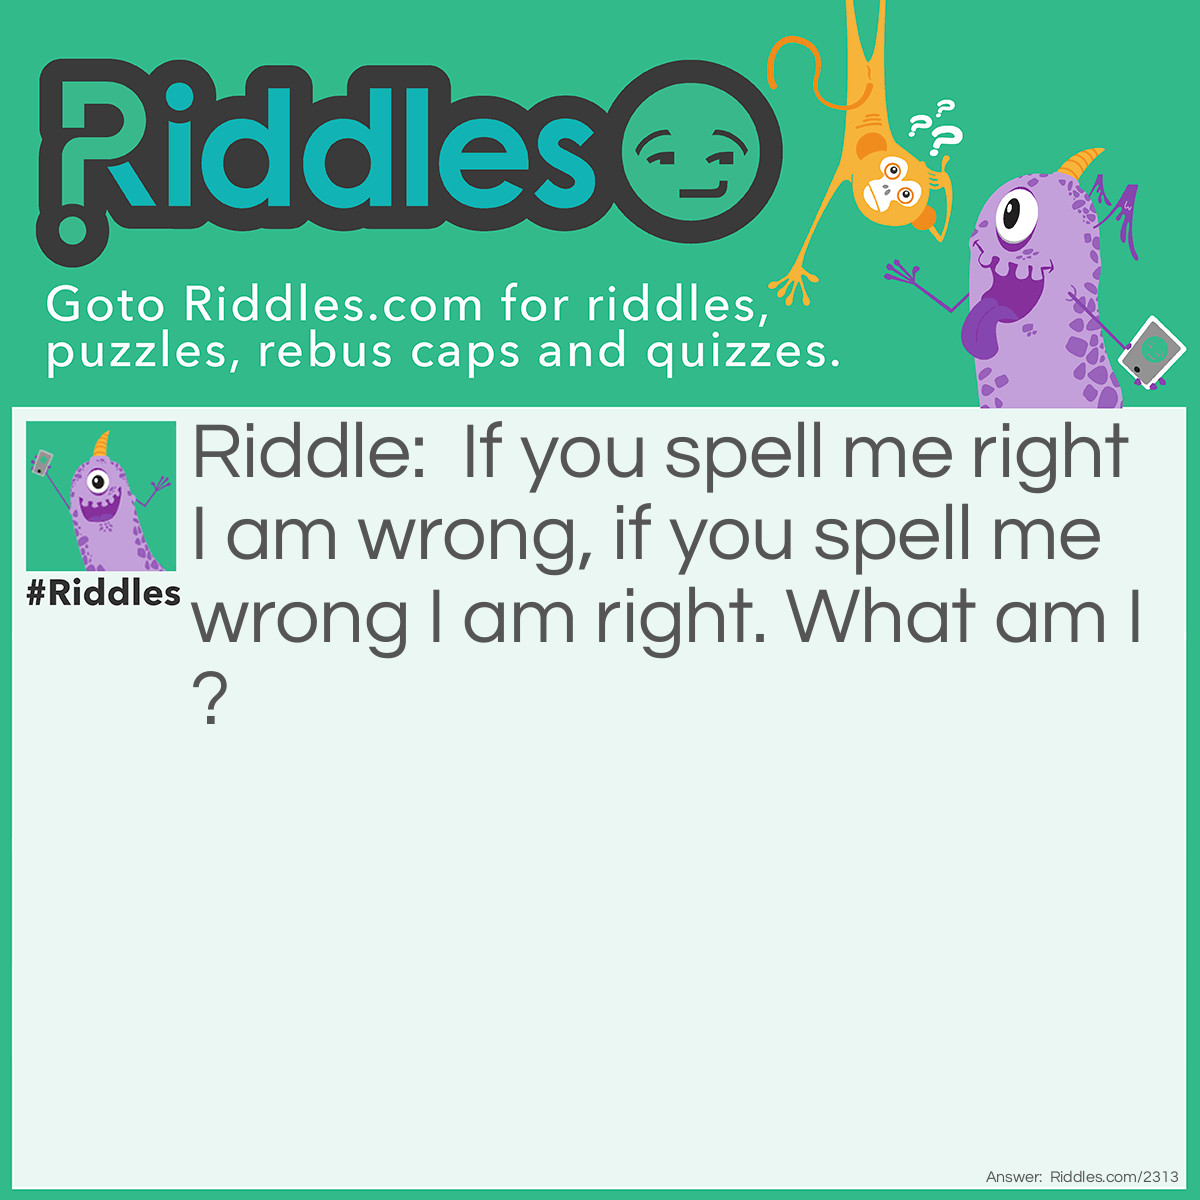 Riddle: If you spell me right I am wrong, if you spell me wrong I am right. What am I? Answer: Wrong.